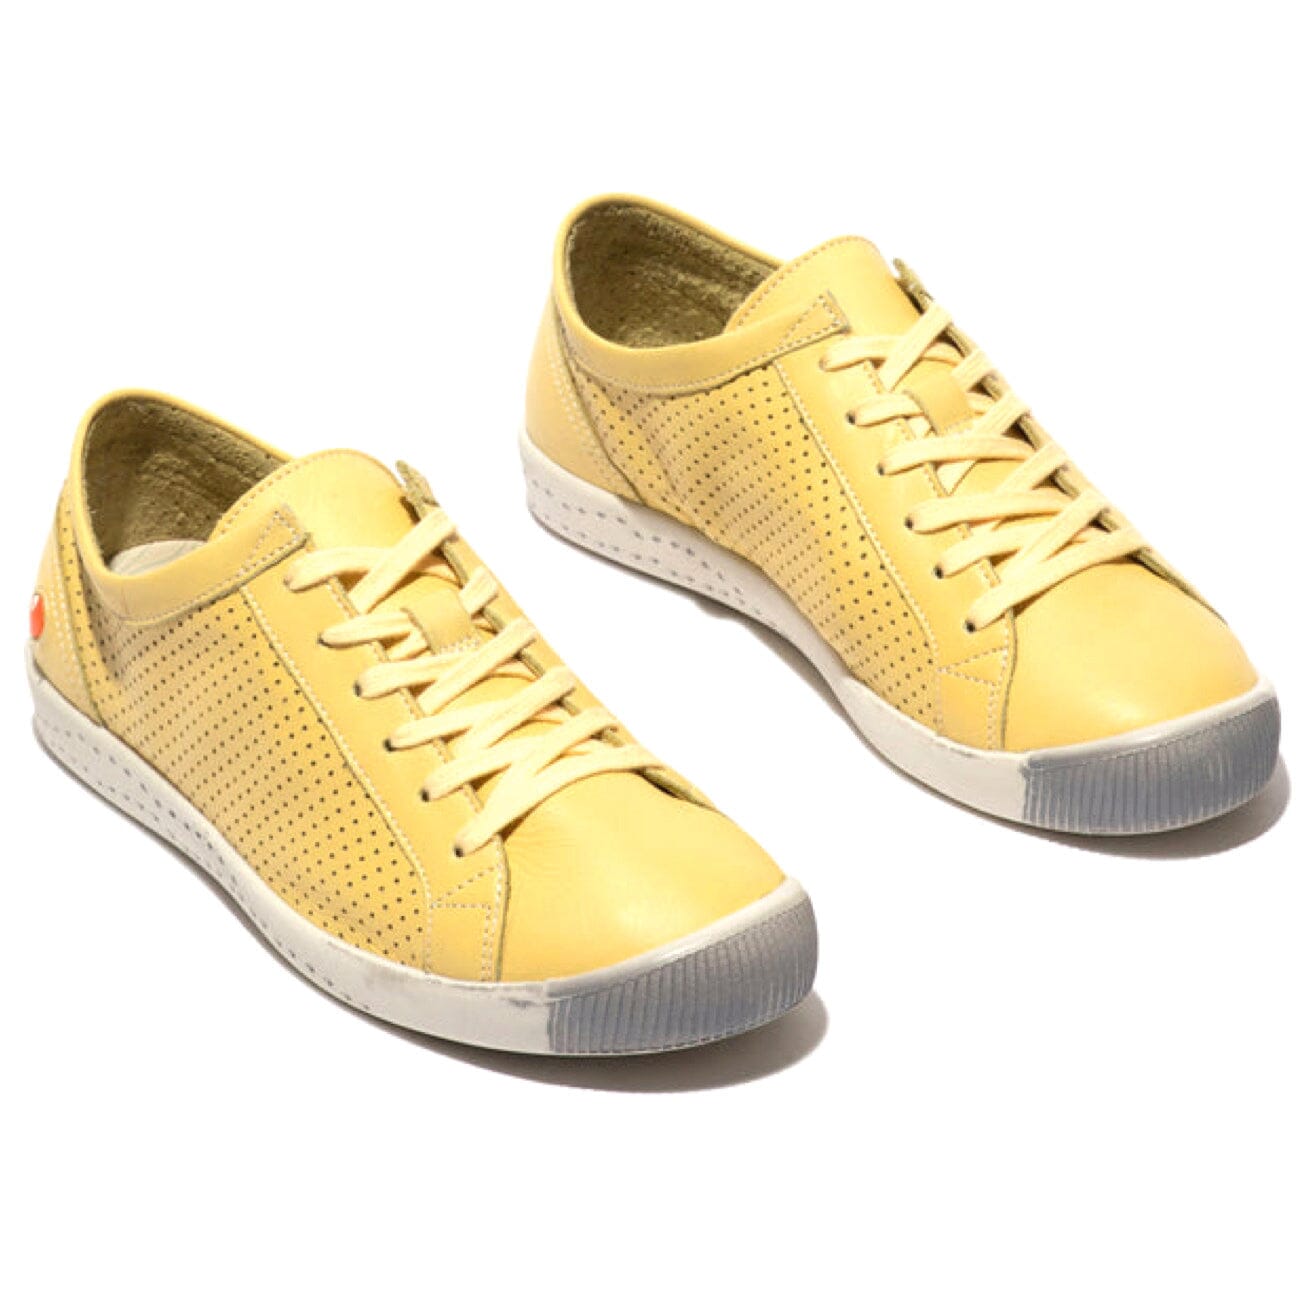 Softinos, Ica388, Laceup Shoe, Smooth Leather, Light Yellow Shoes Softinos Light Yellow 36 